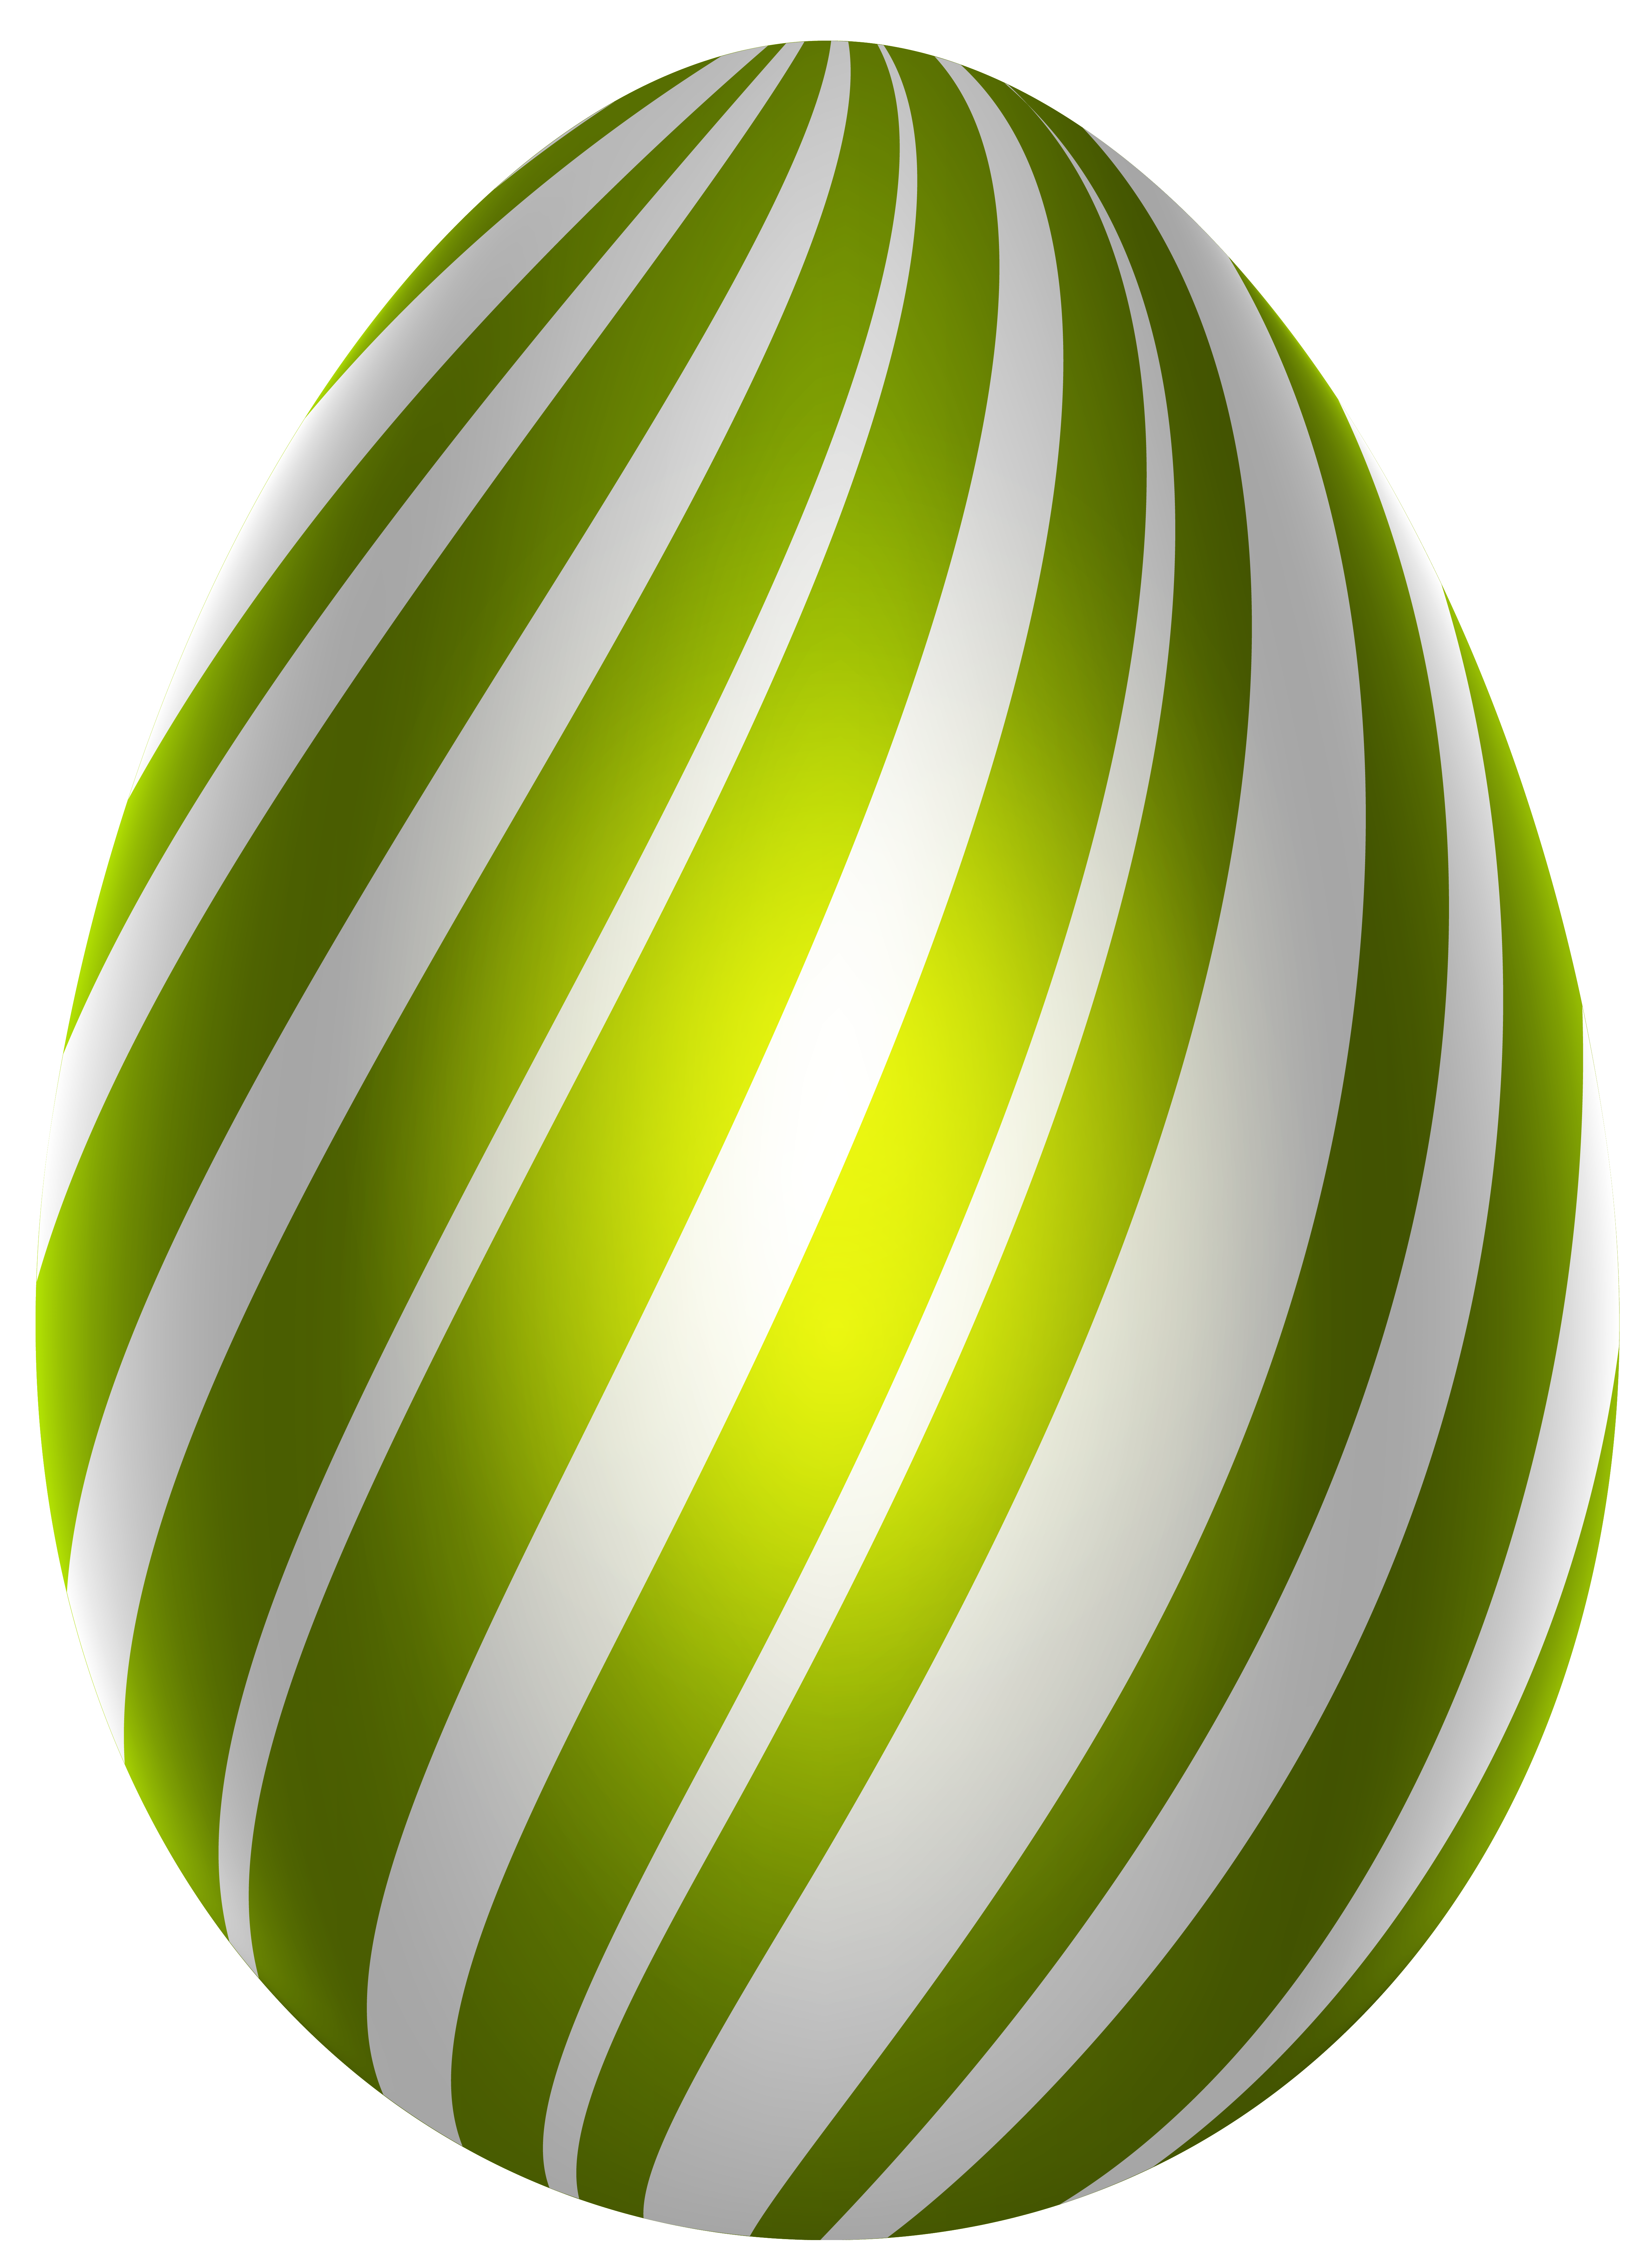 Eggs PNG Image, Egg Clipart Free Download - Free Transparent PNG Logos